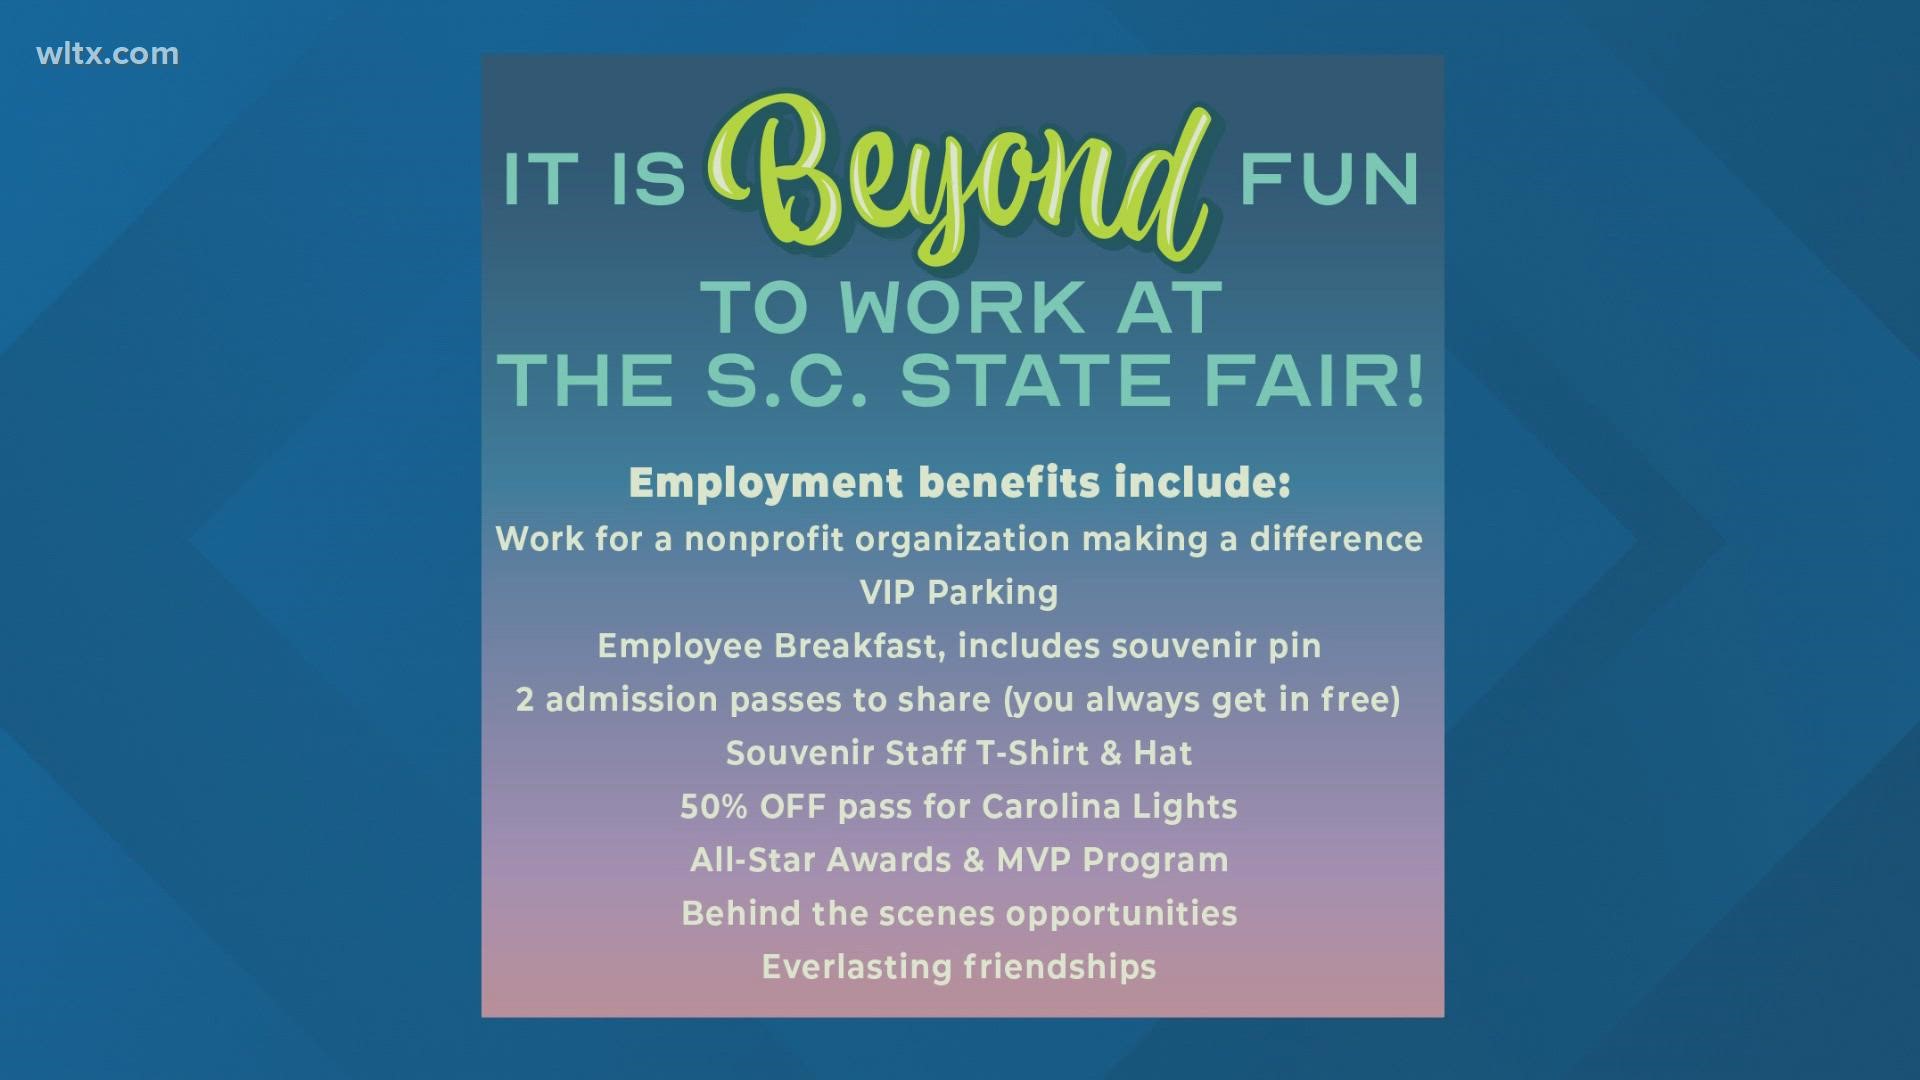 The South Carolina State Fair has openings and you can apply now.